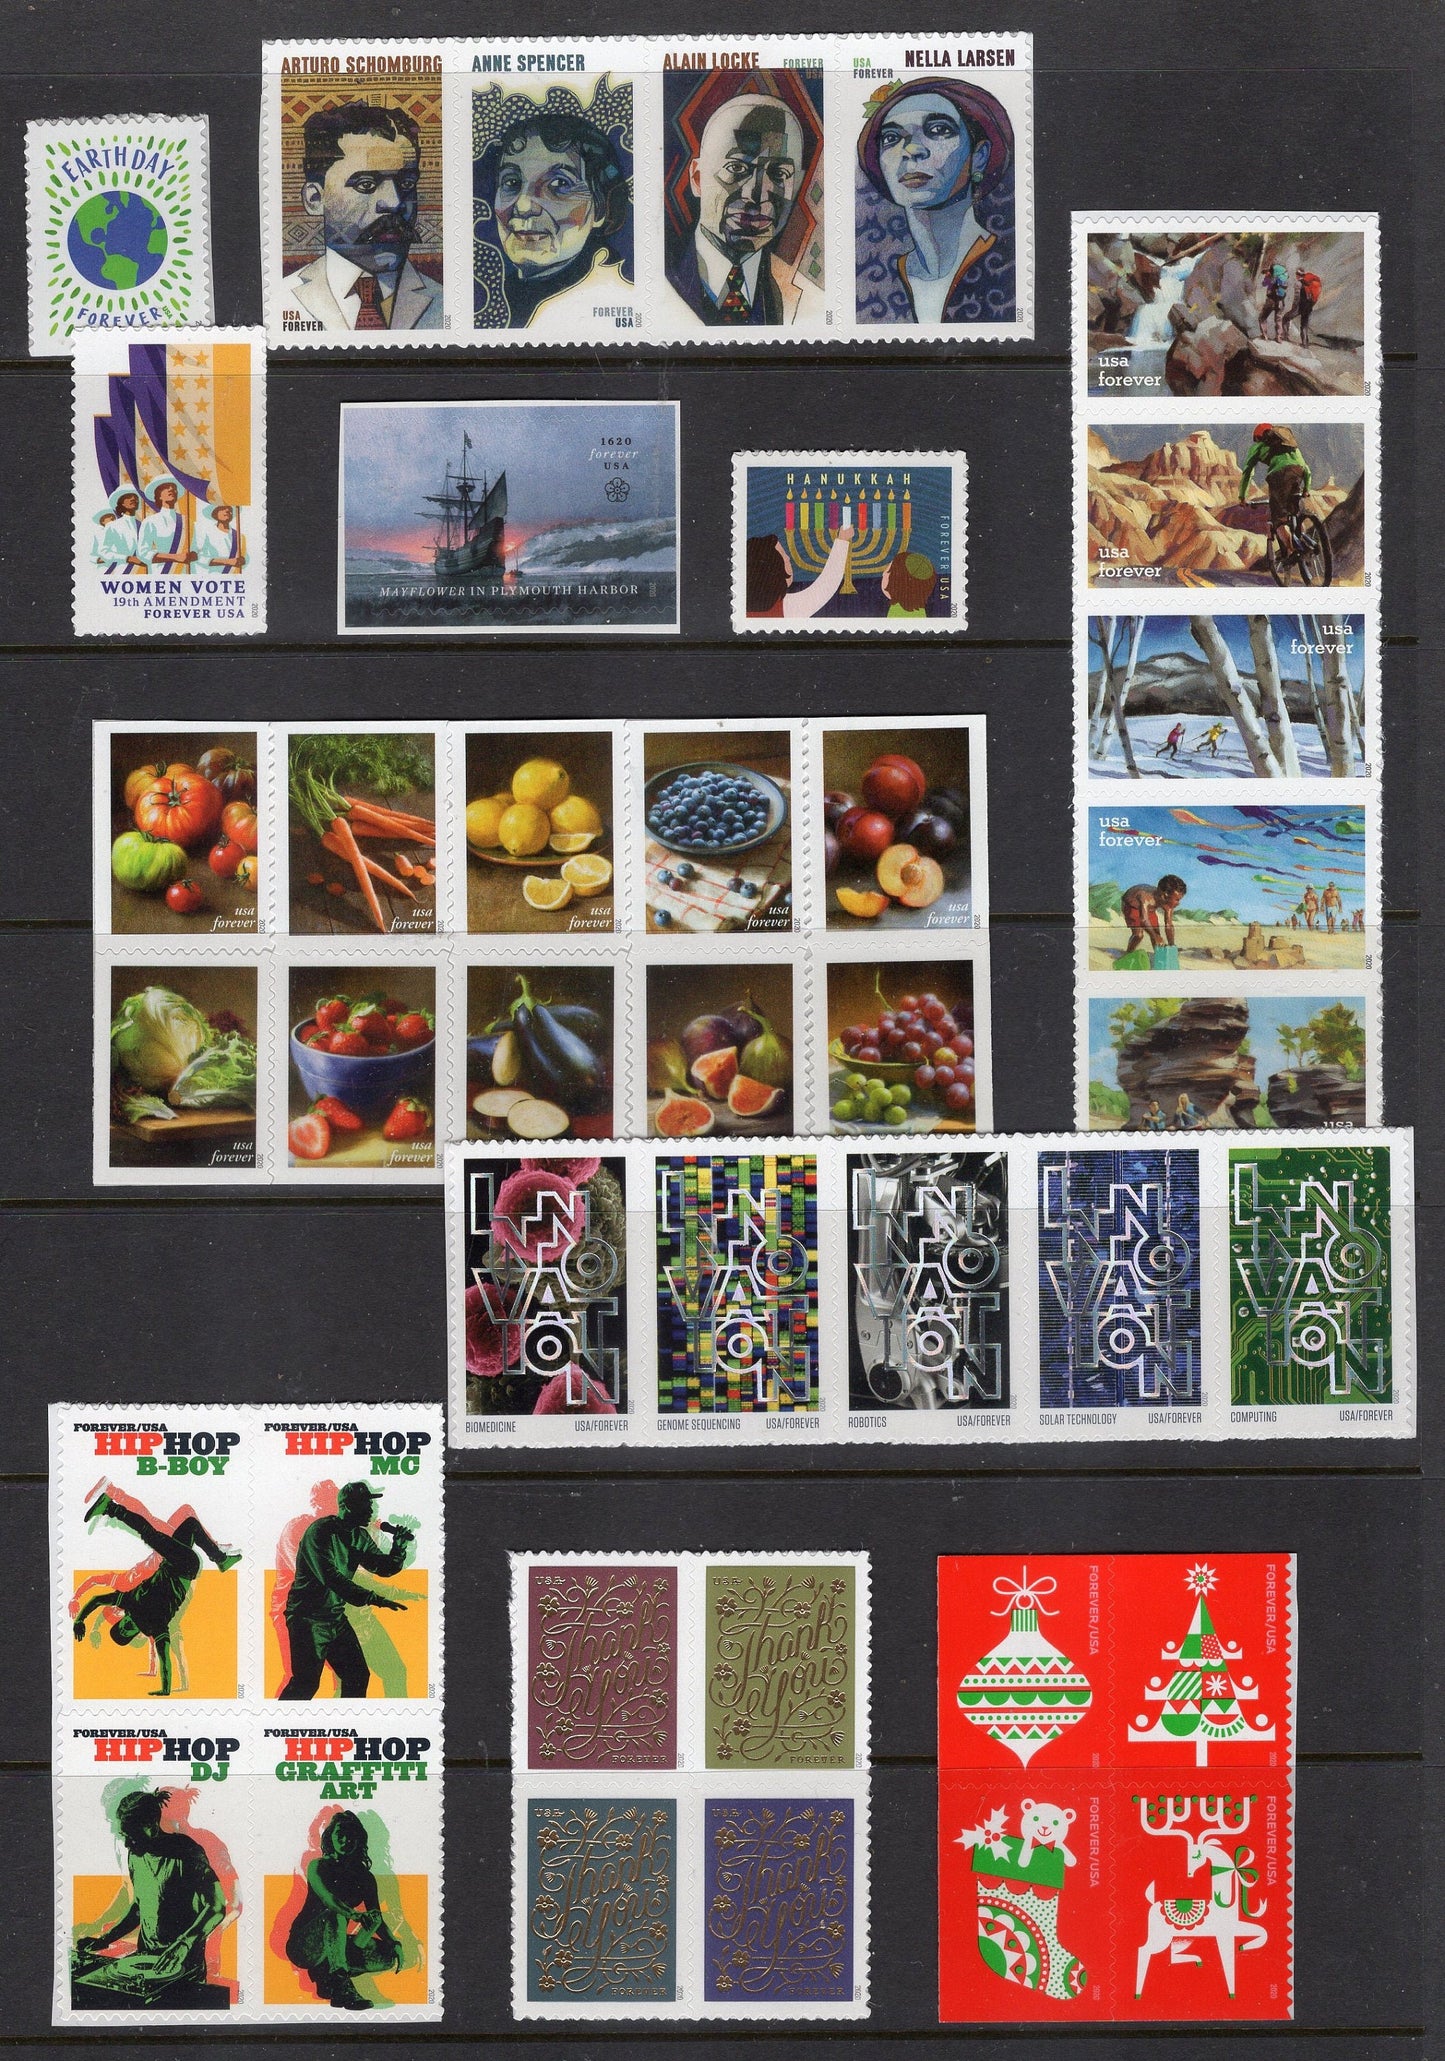 UNITED STATES 2020 COLLECTION All 115 Stamps Issued in in Year 2020 Set - Unused, Mint, Fresh - Issued in 2020 - sY -